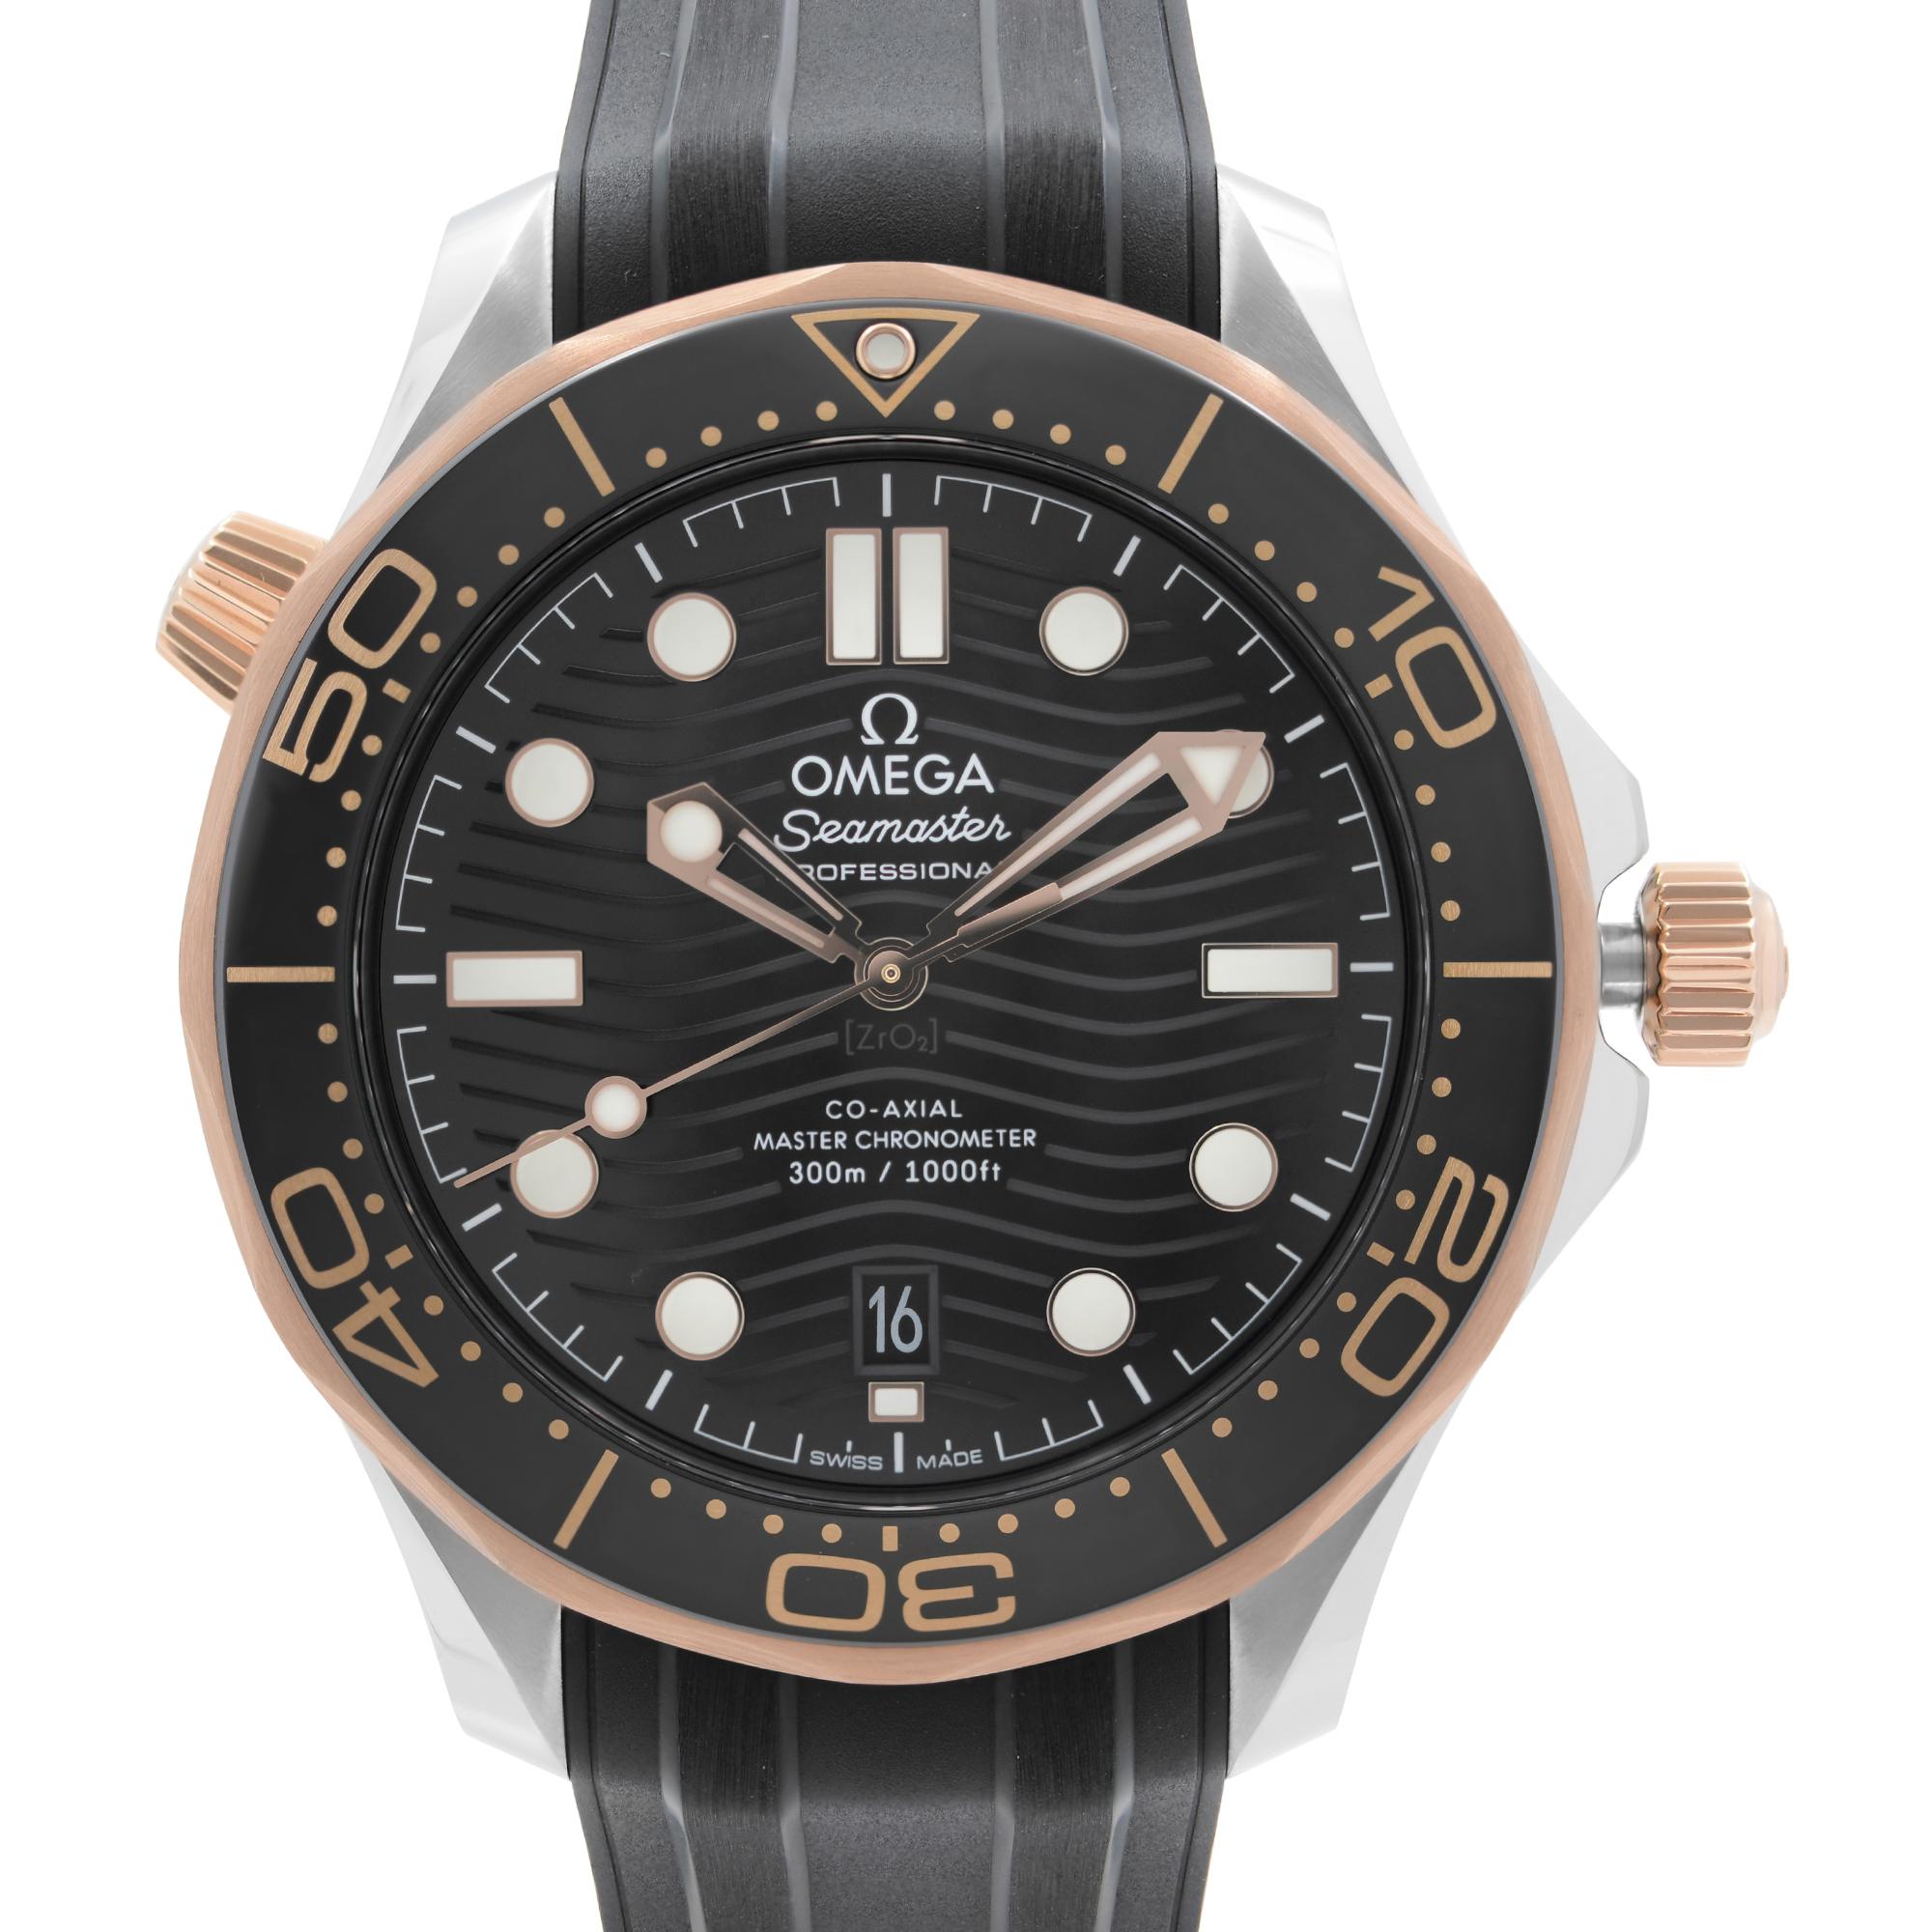 Display Model Omega Seamaster Automatic 18kt Sedna Gold Men's Watch 210.22.42.20.01.002. This Beautiful Timepiece Features: Stainless Steel Case with a Black Rubber Strap, Rotating 18kt Sedna Gold Bezel with a Black Ceramic (count-up elapsed time)